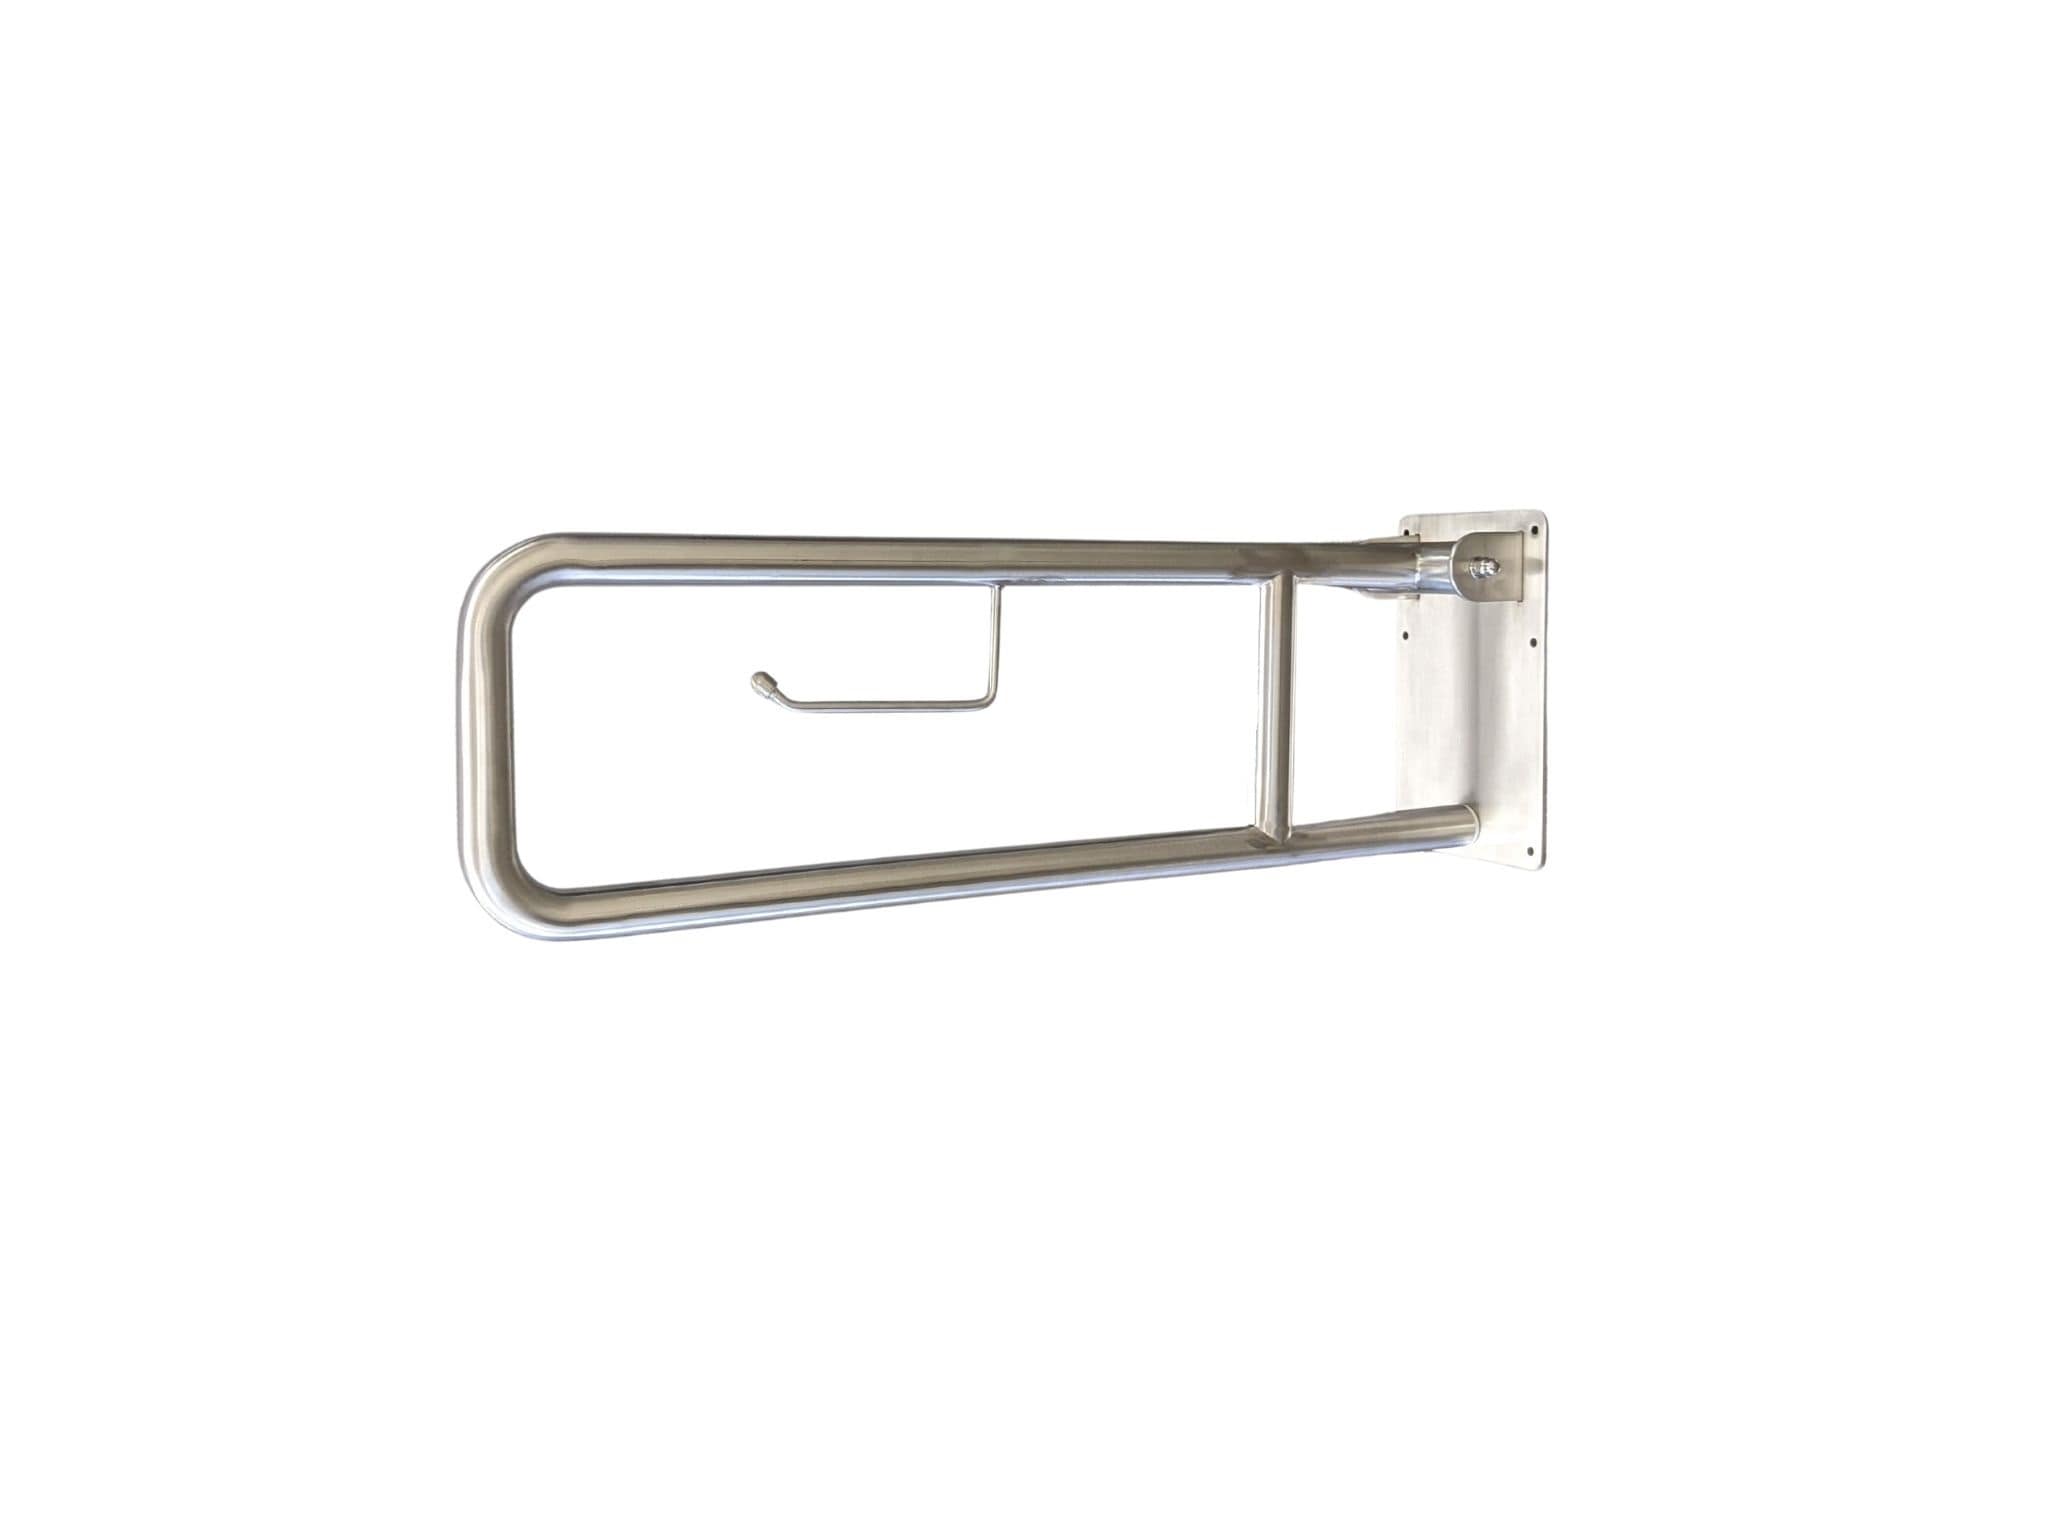 CSI Bathware Flip up 29-in Satin Stainless Wall Mount ADA Compliant Swing Up Grab Bar (500-lb Weight Capacity)